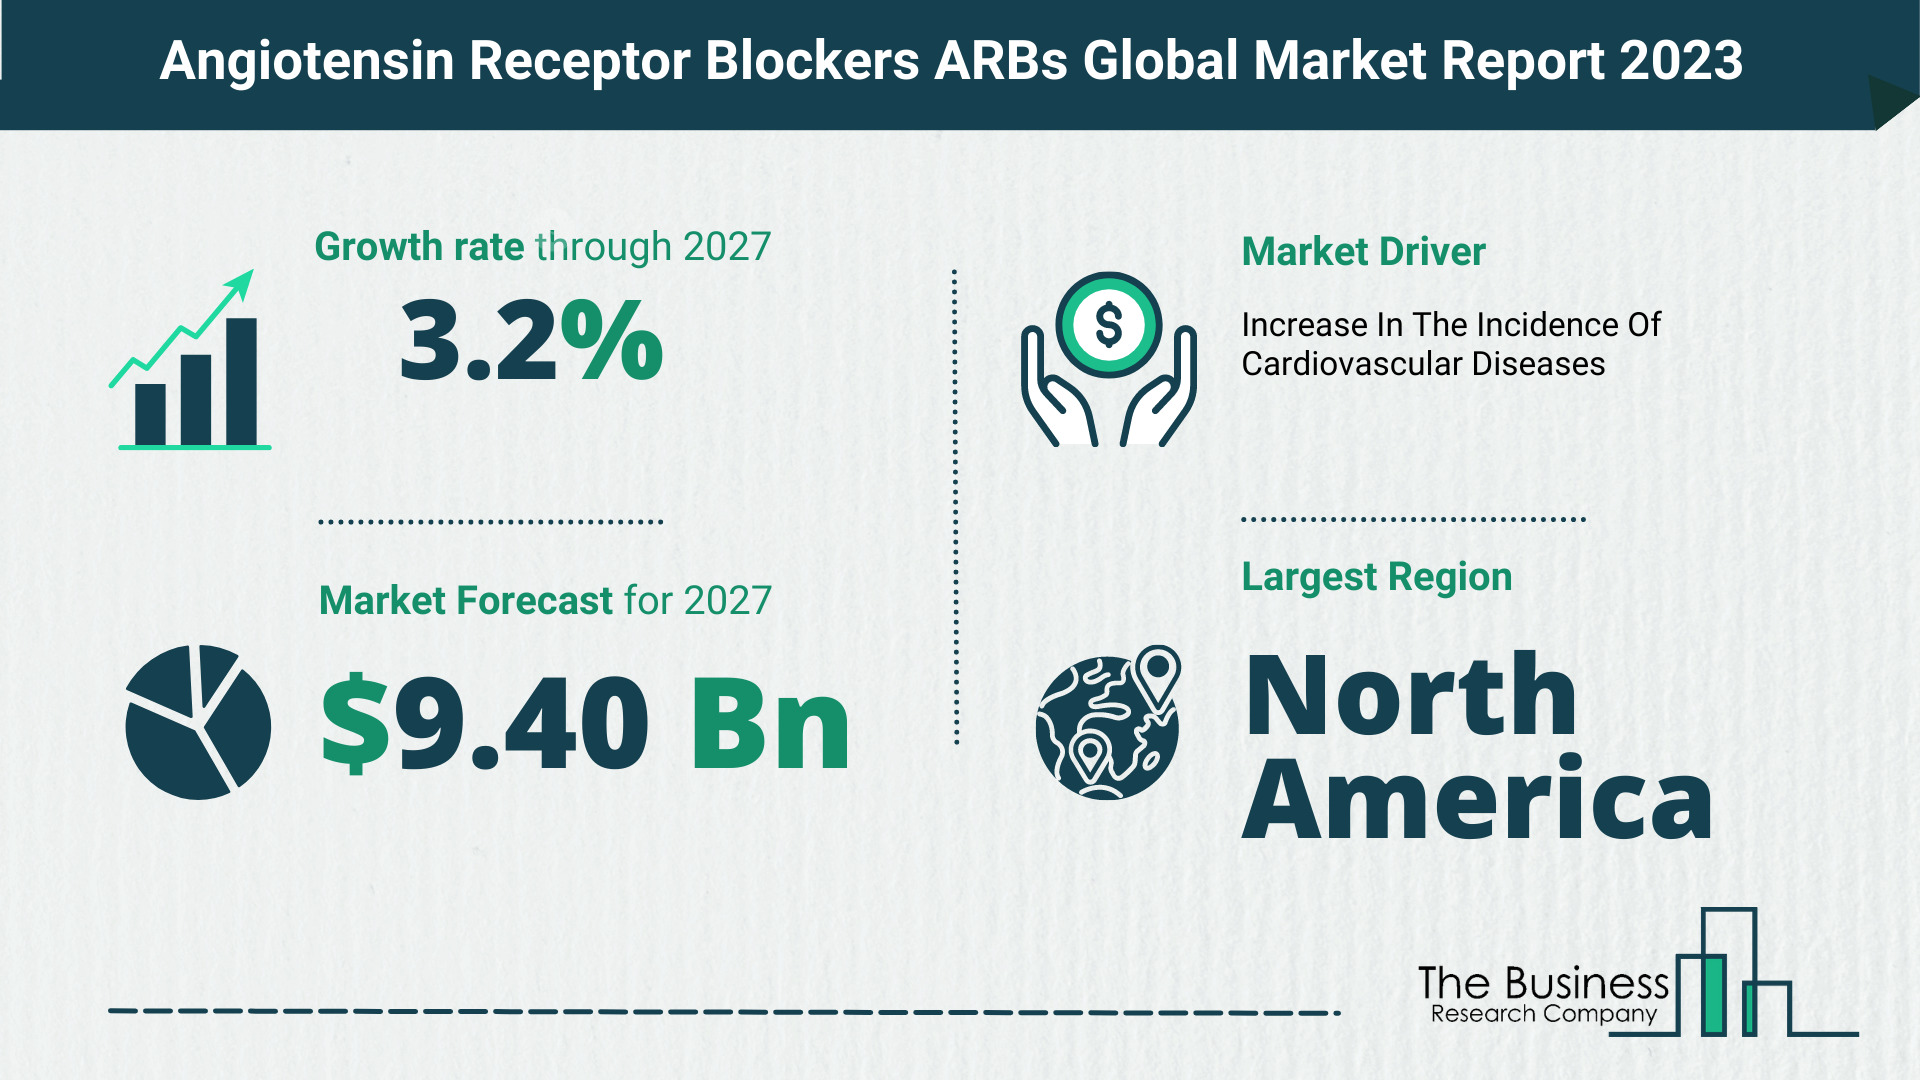 What Will The Angiotensin Receptor Blockers ARBs Market Look Like In 2023?